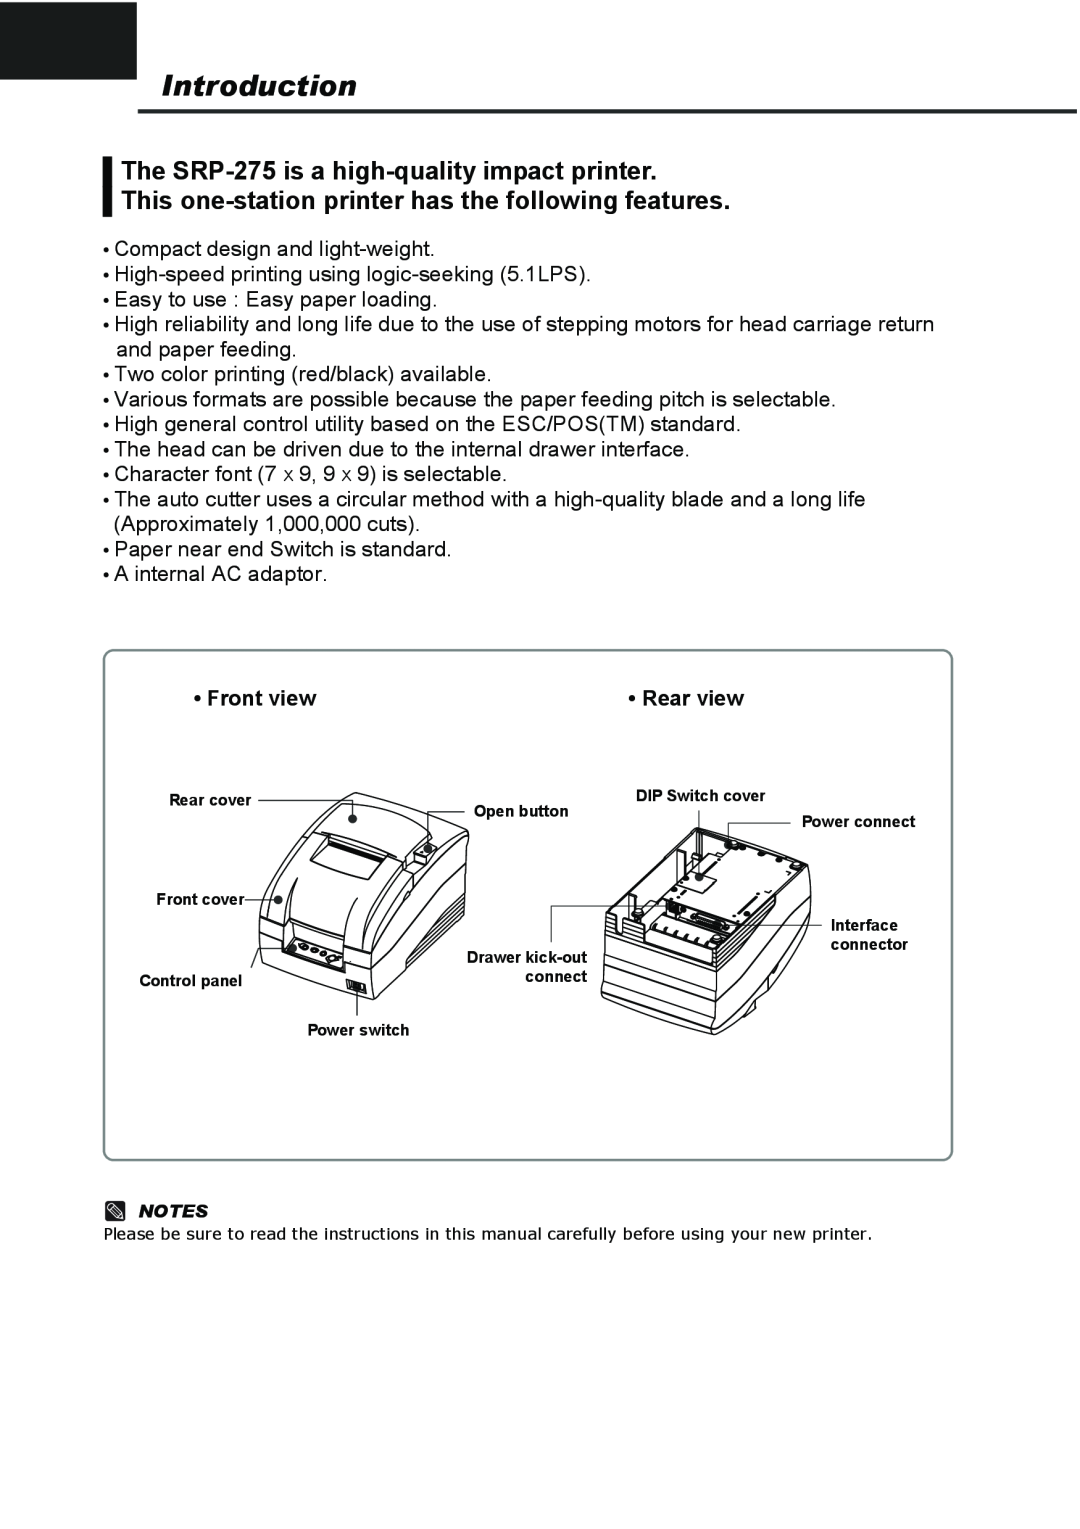 Samsung SRP275APG user manual Introduction, The SRP-275 is a high-quality impact printer, Front view, Rear view 